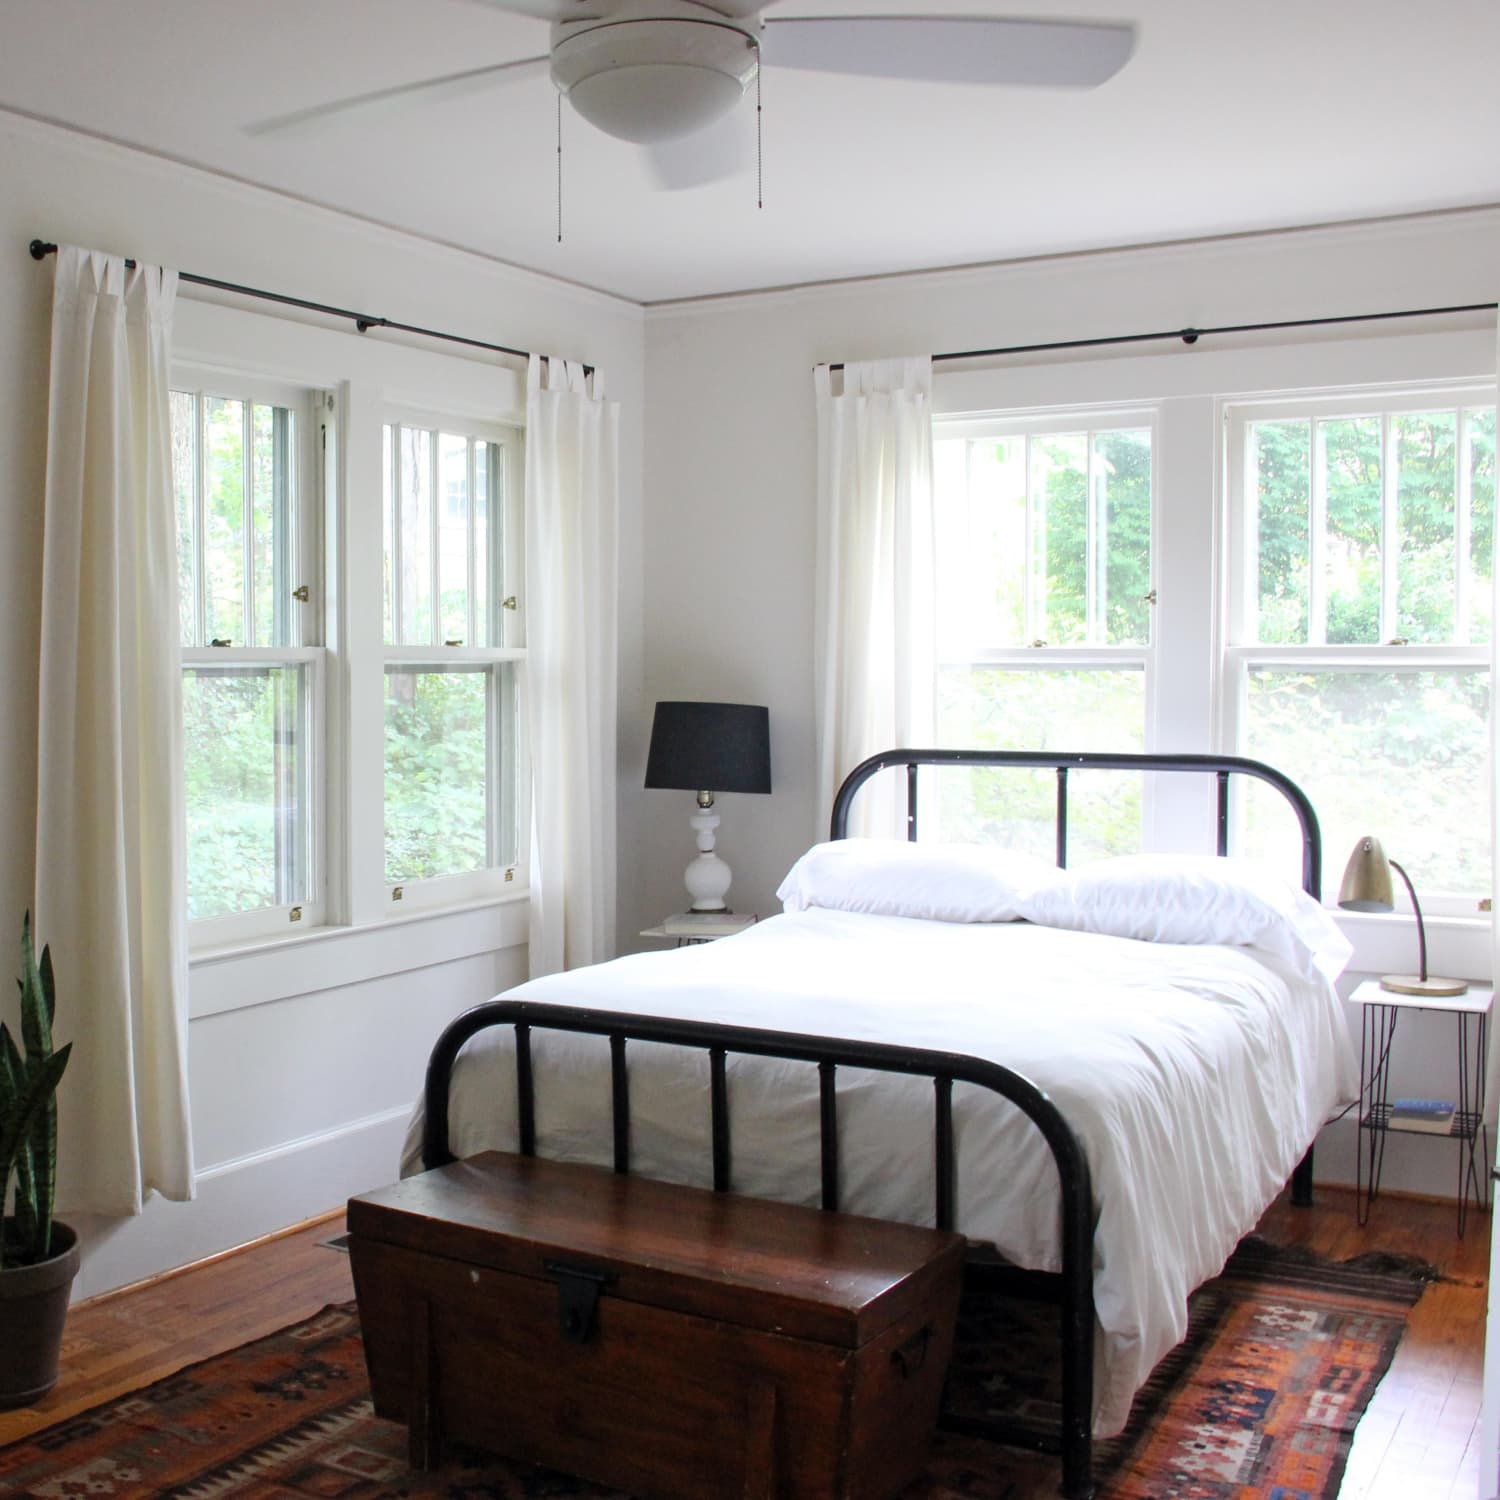 6 Easy Ways to Hang Curtains Without Drilling Into Walls | Apartment Therapy